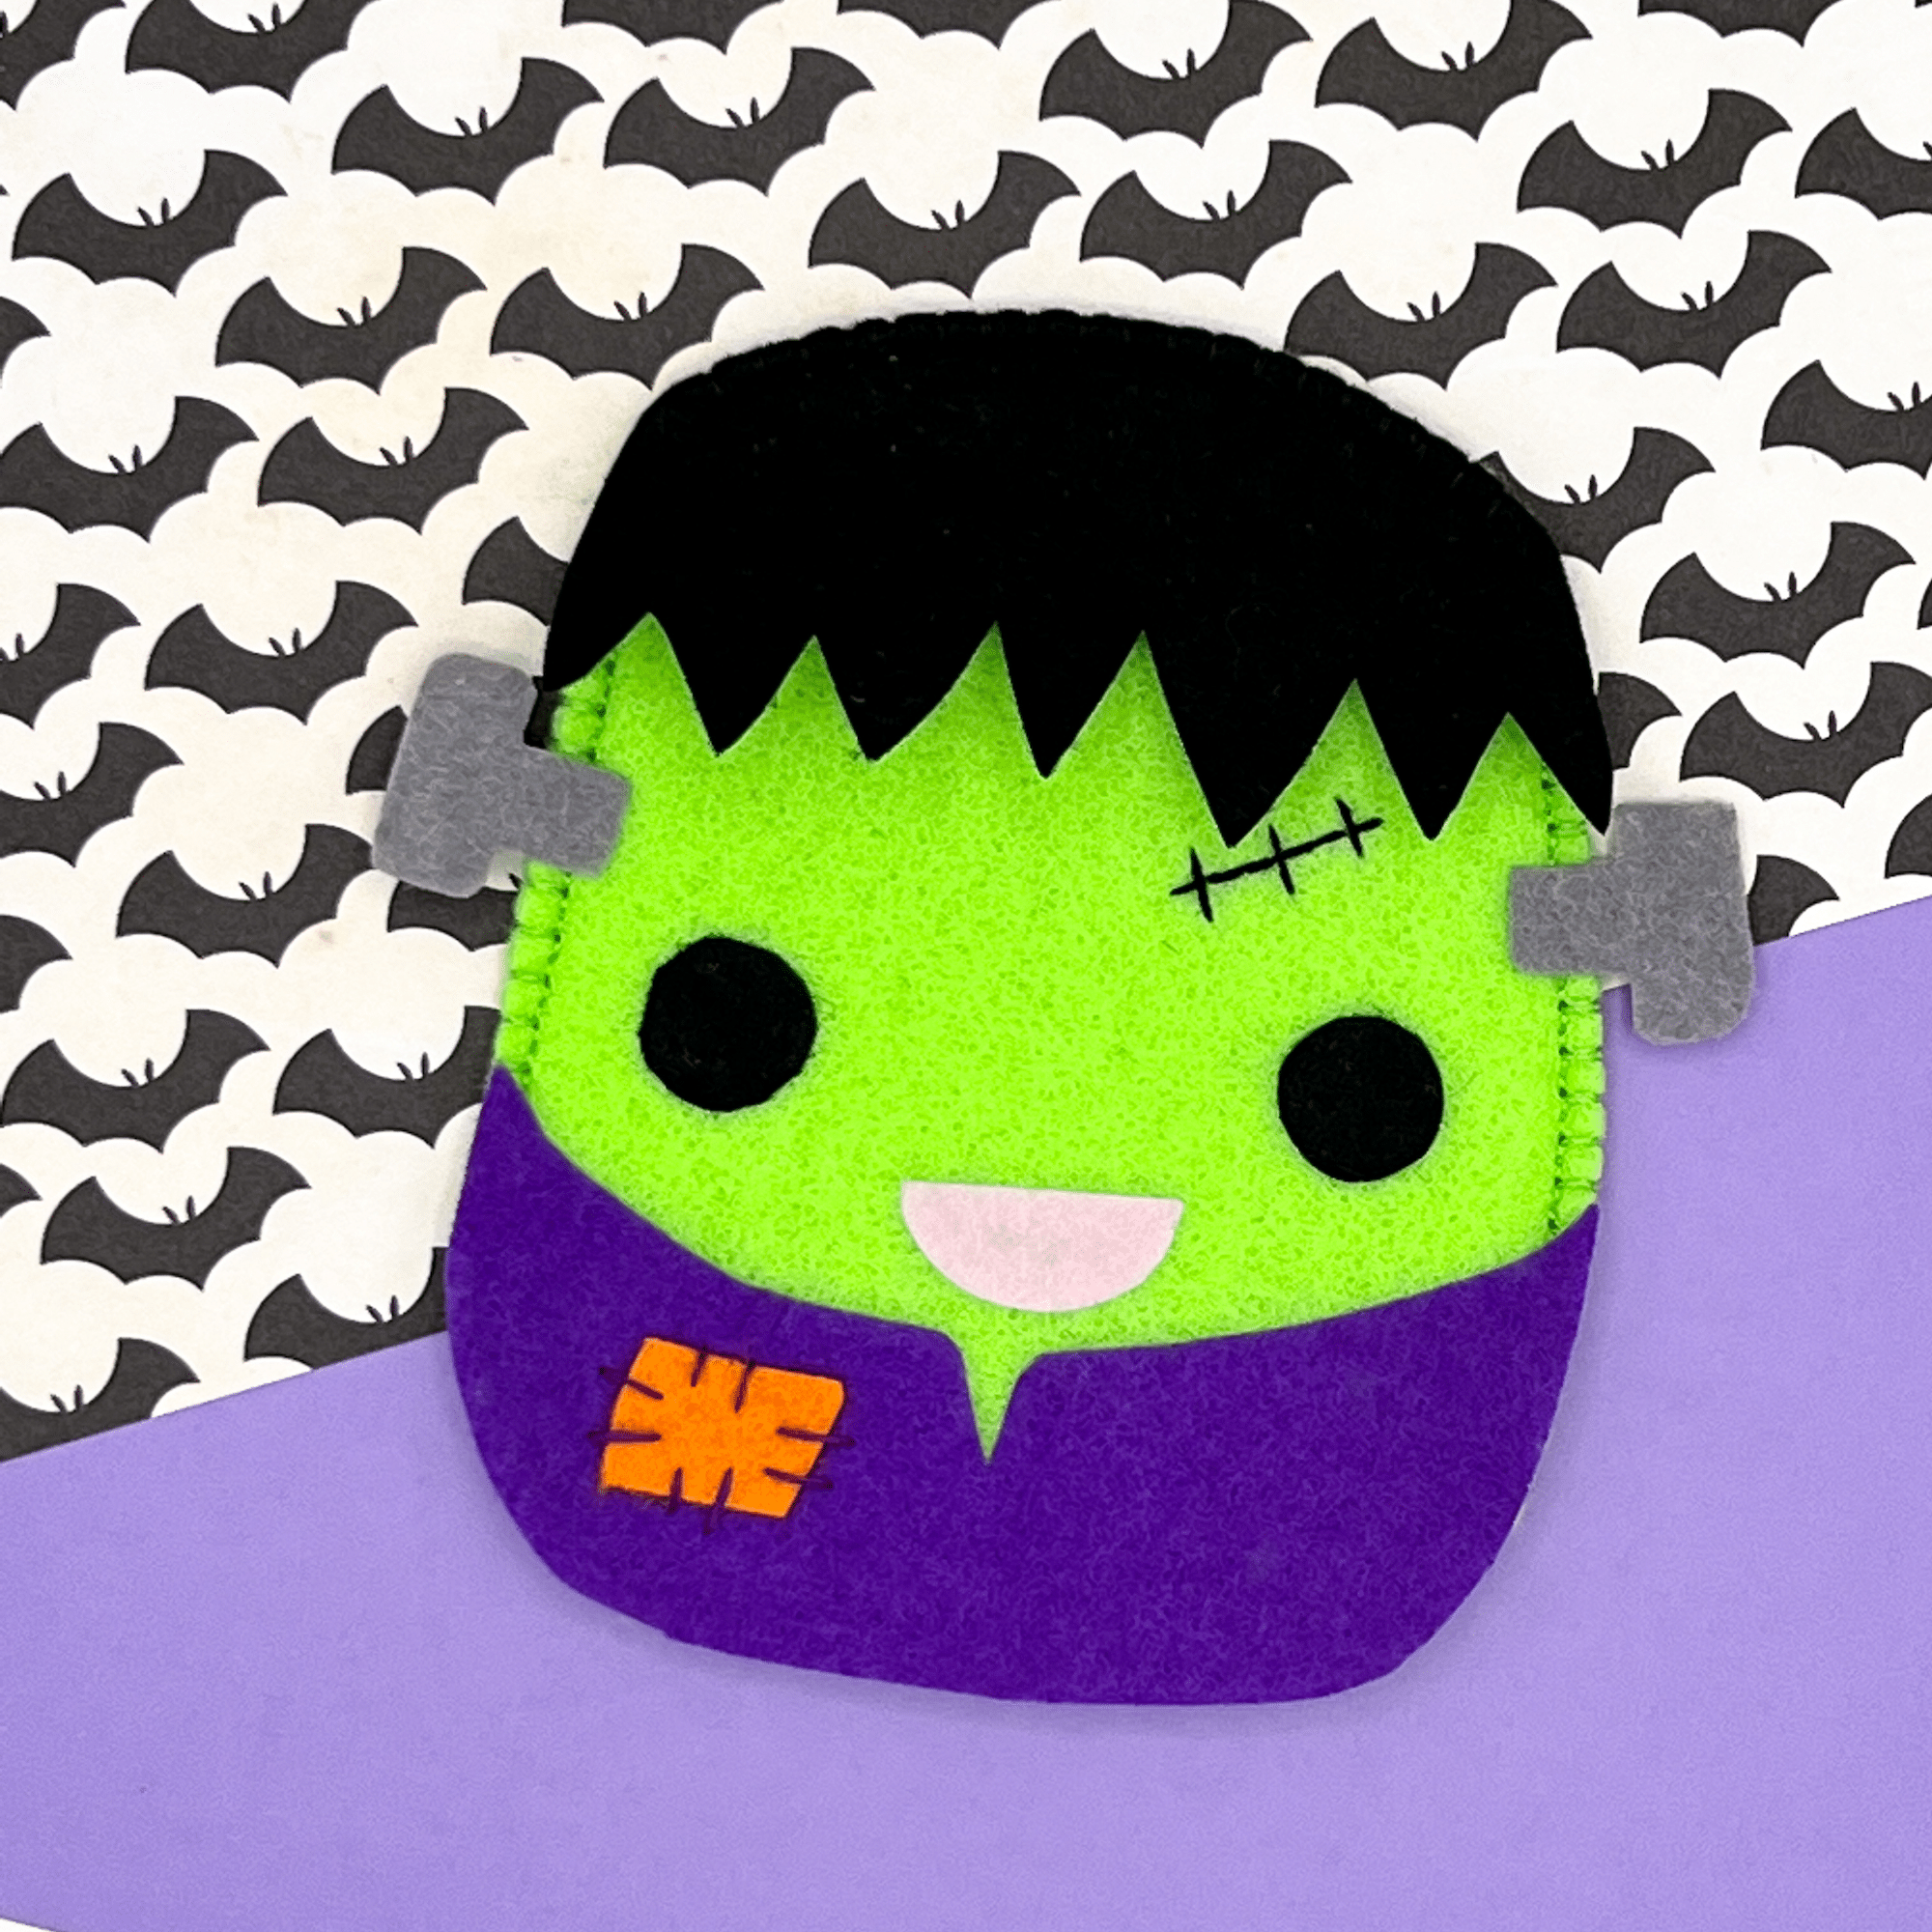 A felt Frankenstein candy pouch on a purple background.